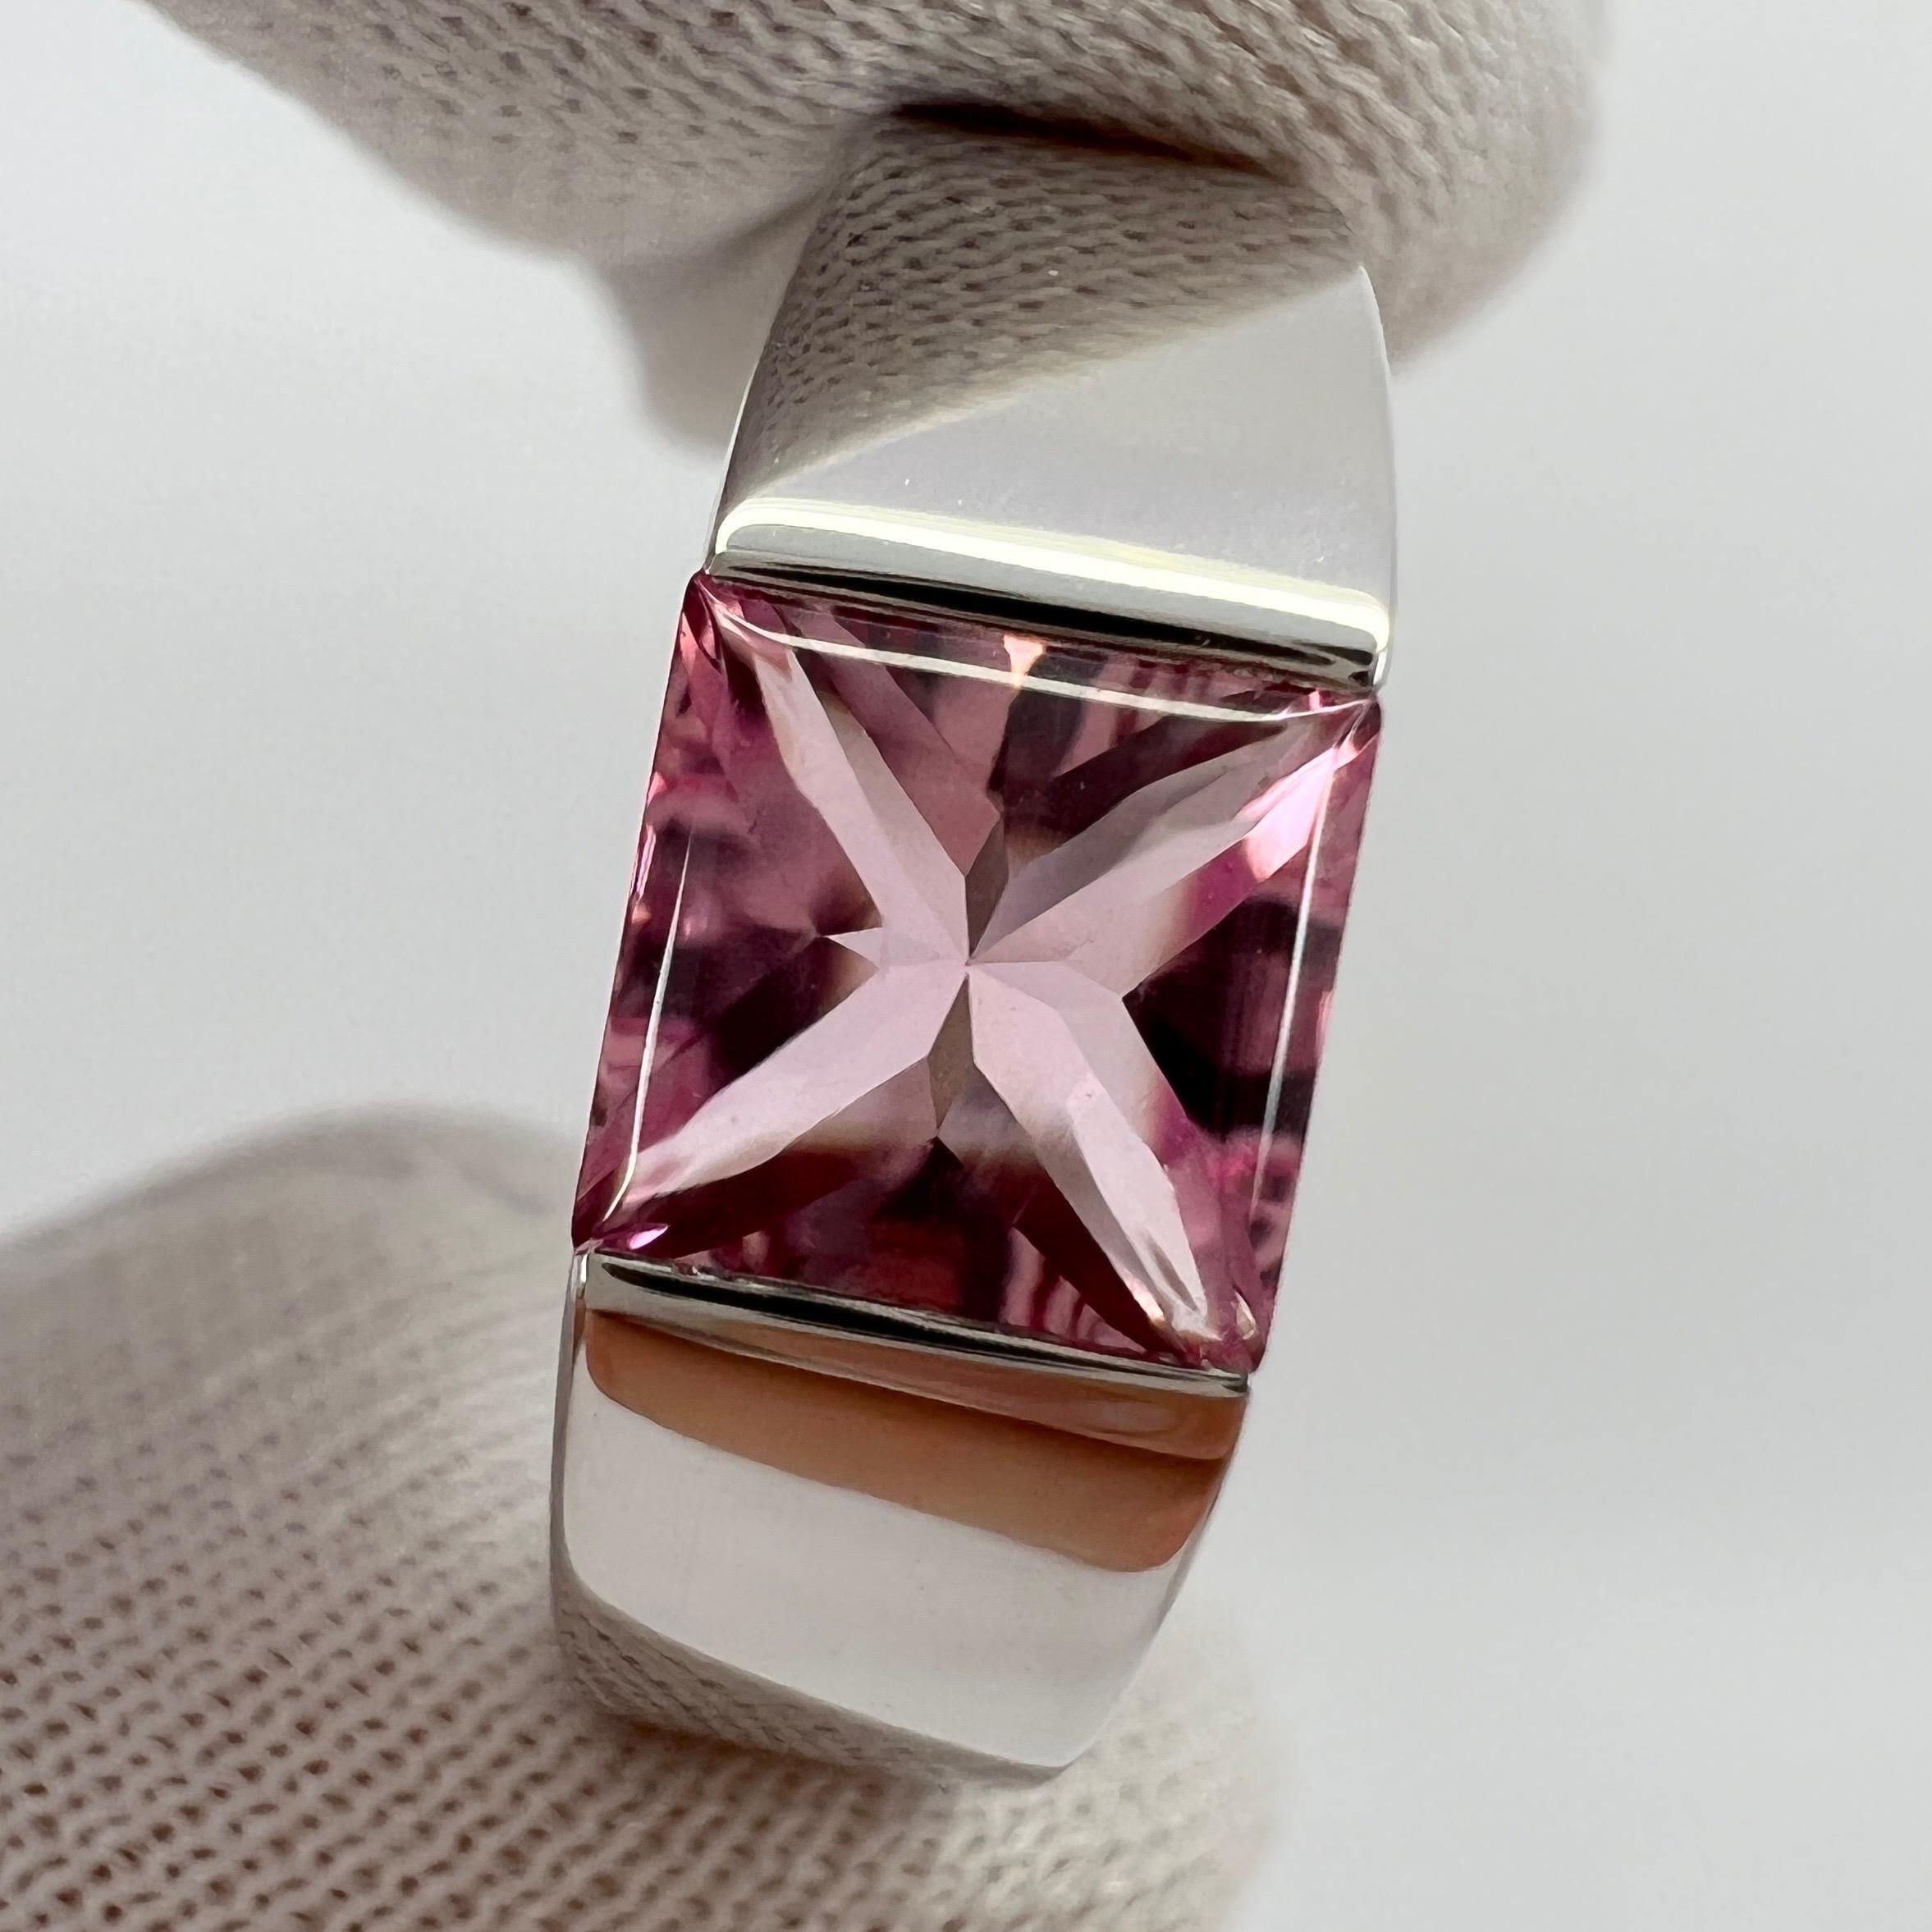 Vintage Cartier Pink Tourmaline 18 Karat White Gold Tank Ring.

Stunning white gold ring with a 6mm tension set bright pink fancy-cut tourmaline. Fine jewellery houses like Cartier only use the finest of gemstones and this tourmaline is no